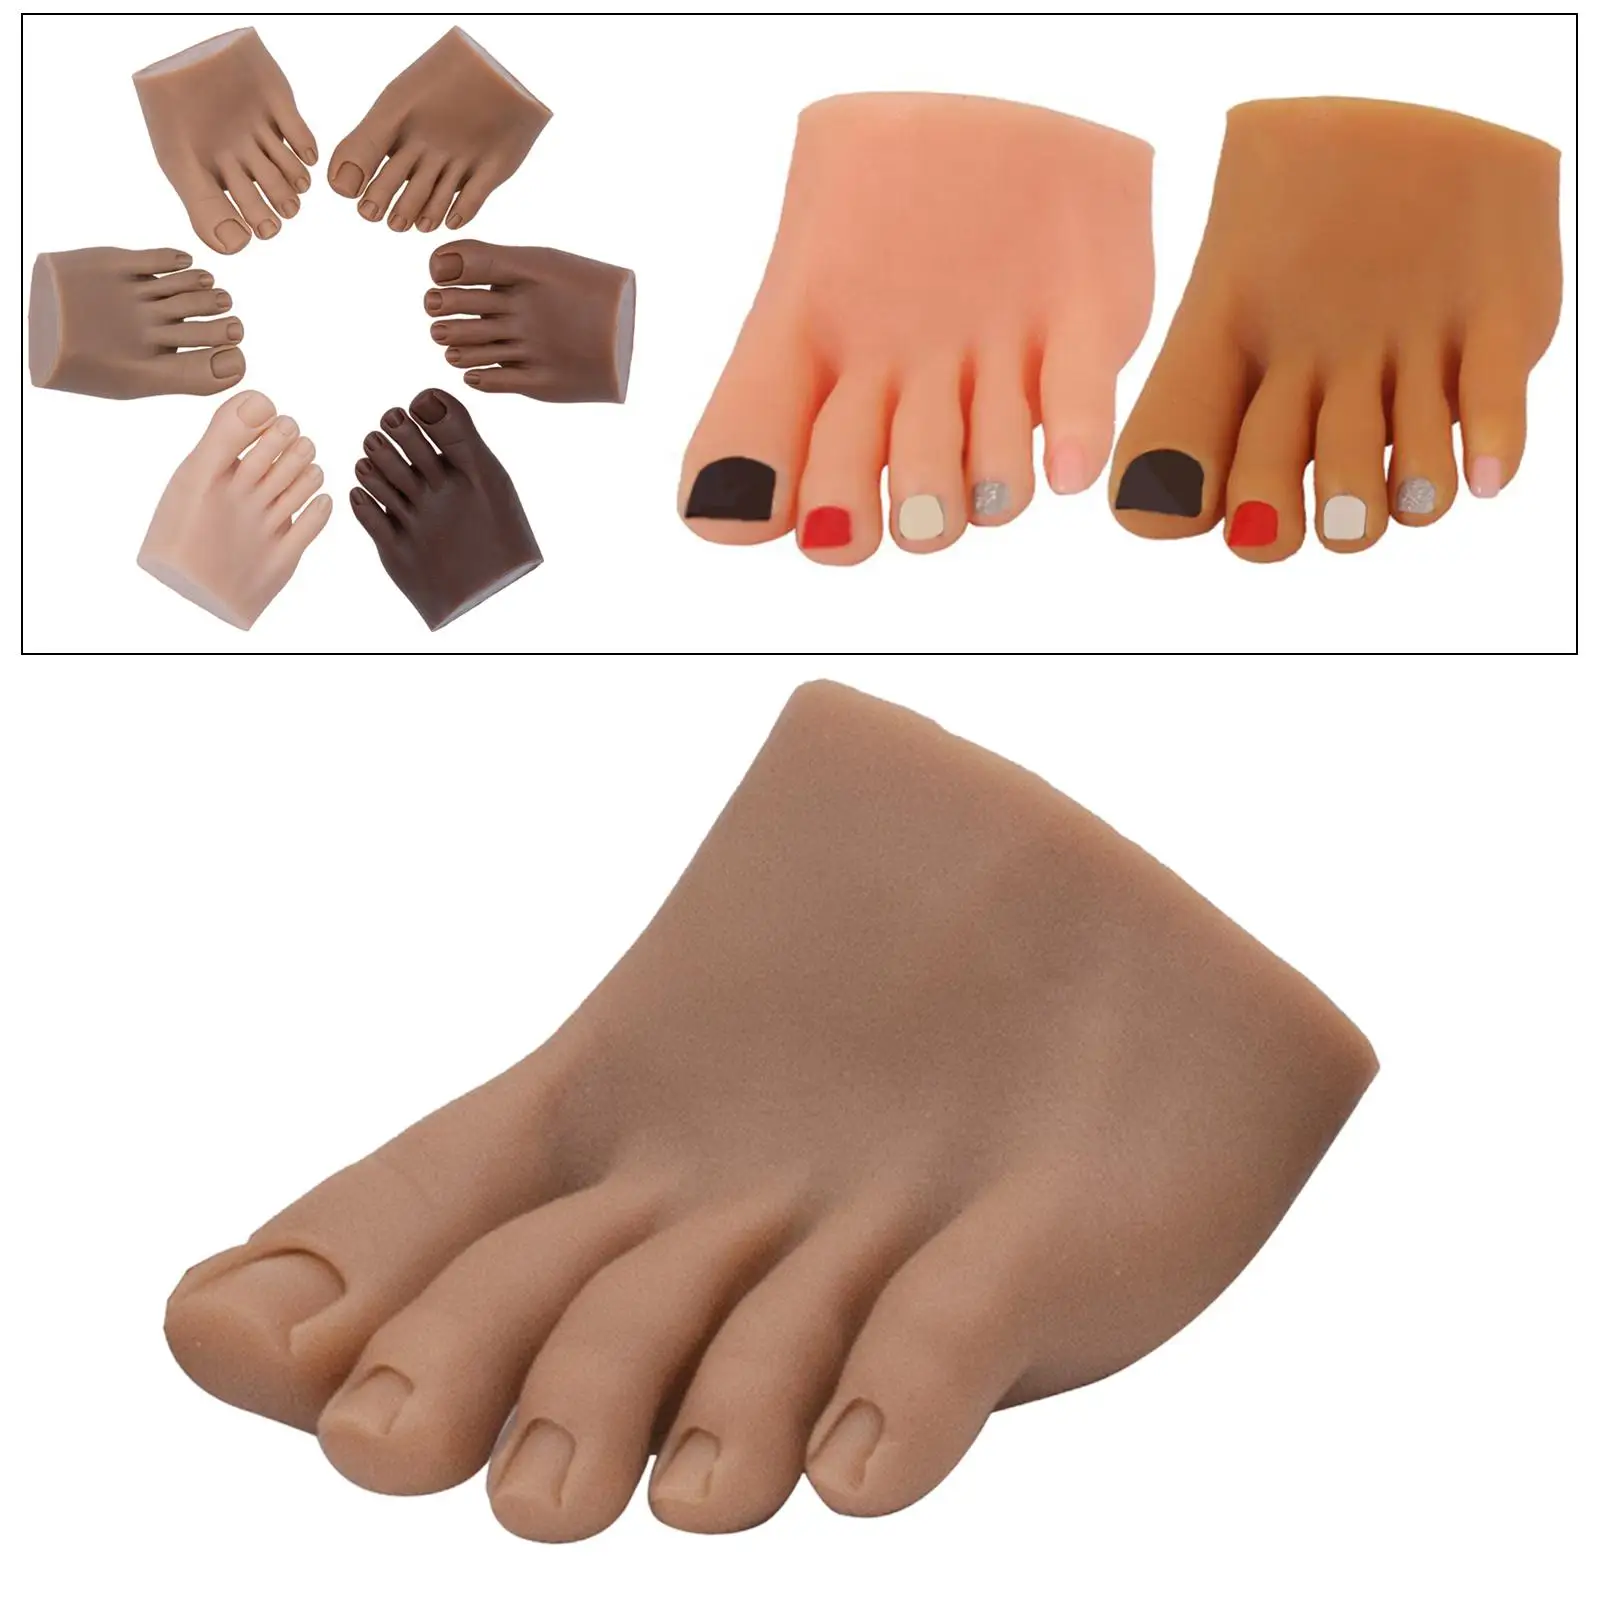 Nail Practice Foot Model Mannequin for Nail Art Beginners Display